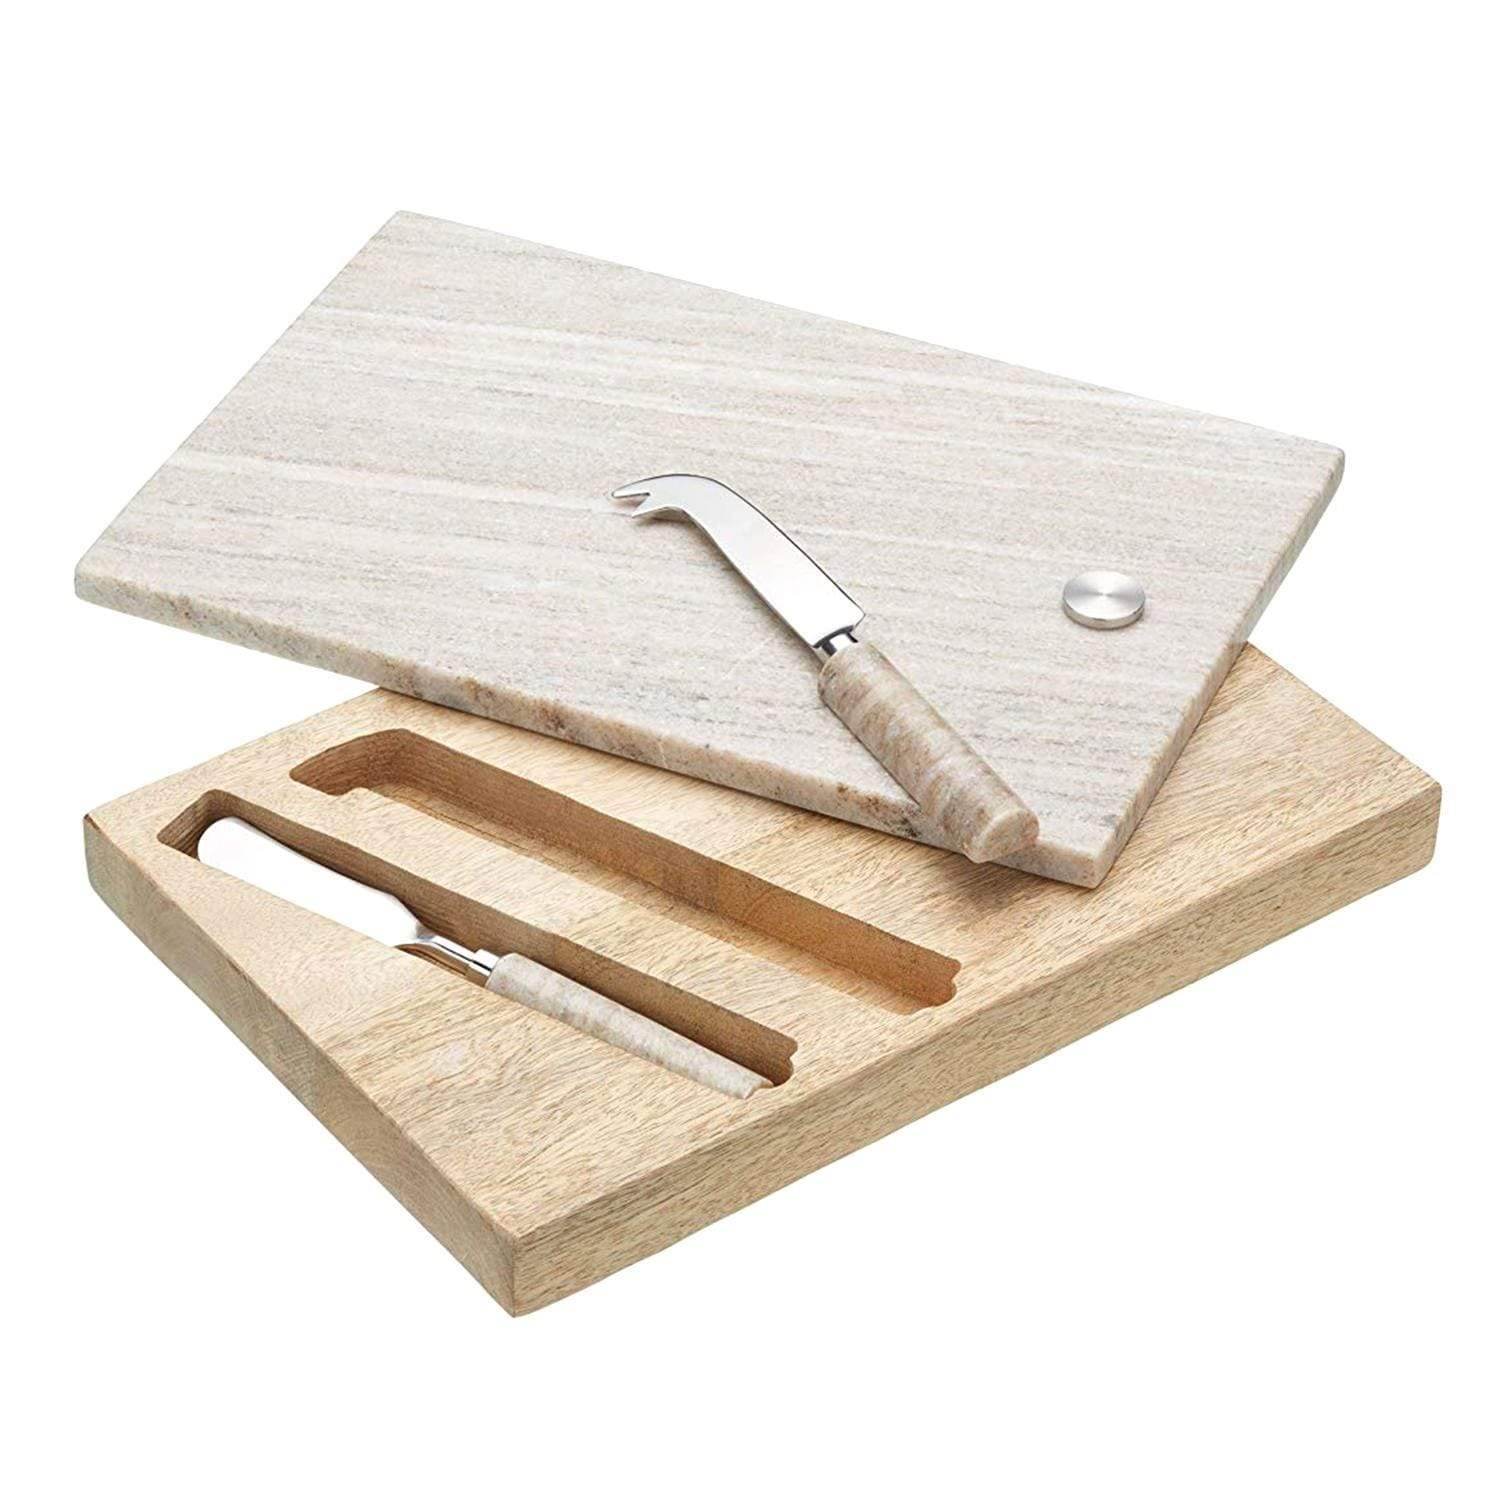 Kitchen Craft Masterclass Artesa Marble and Wood Cheese Board & Knife Set - Beige and Grey - ARTCHSBOARD - Jashanmal Home